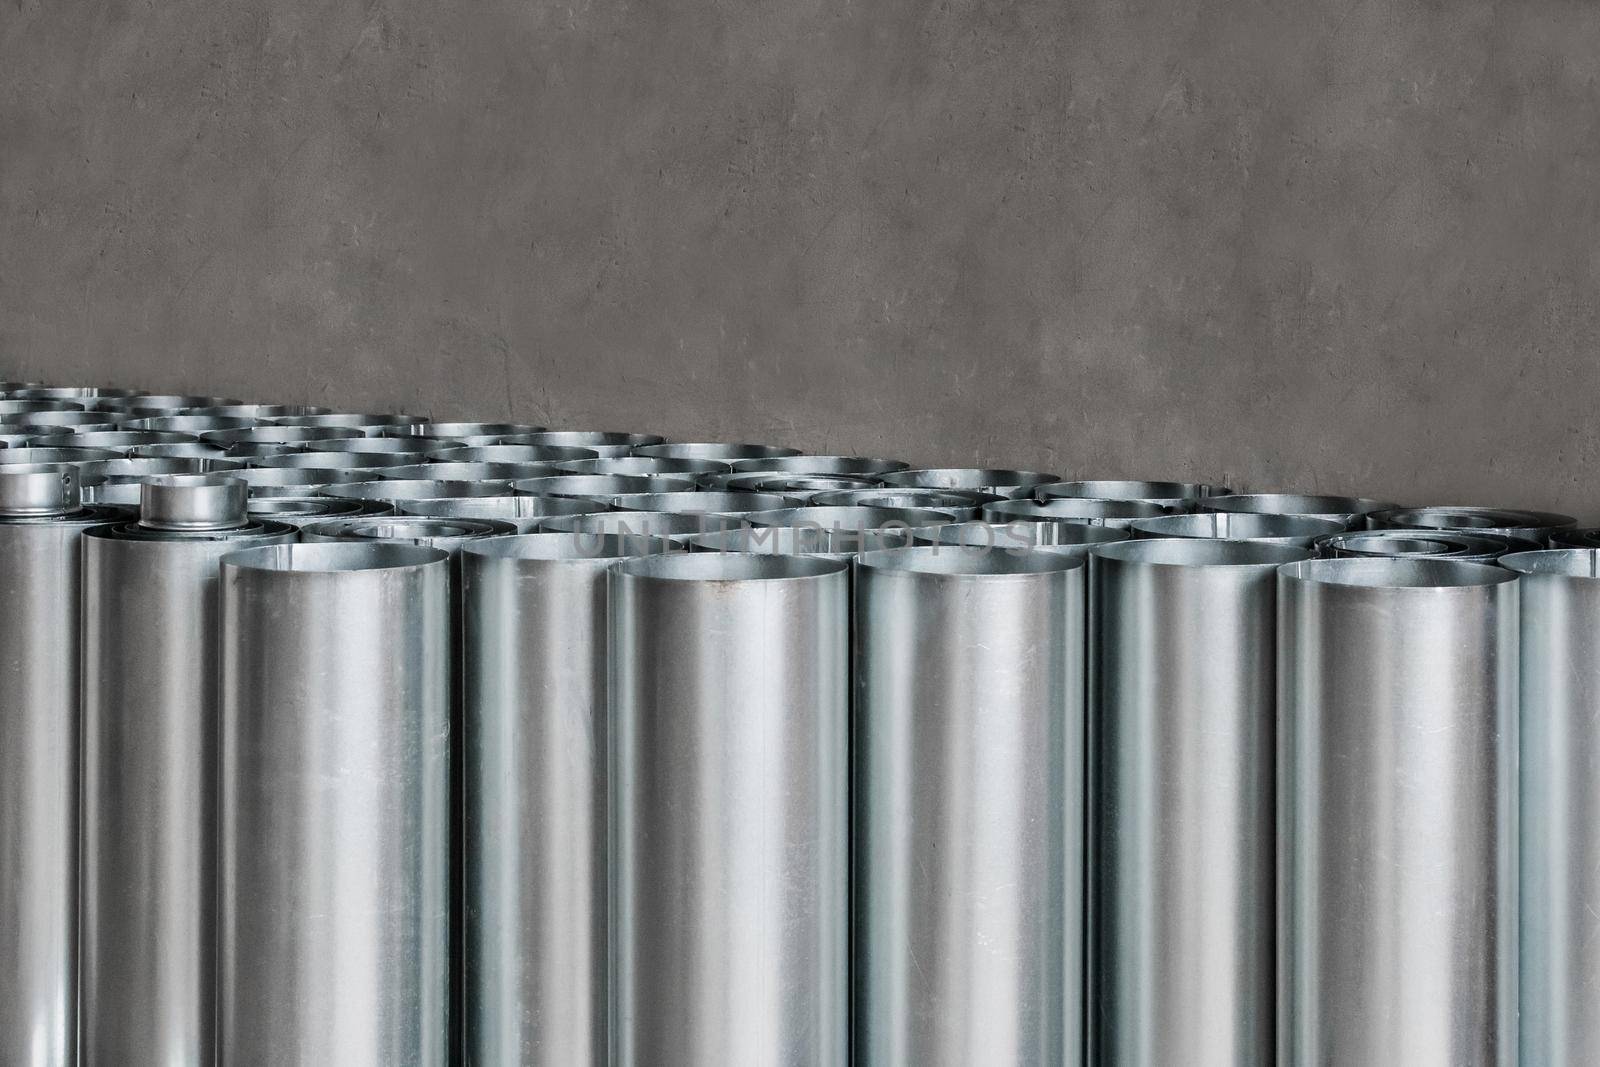 Pile of round metal pipes at a construction site. Storage steel tube industrial materials on warehouse.